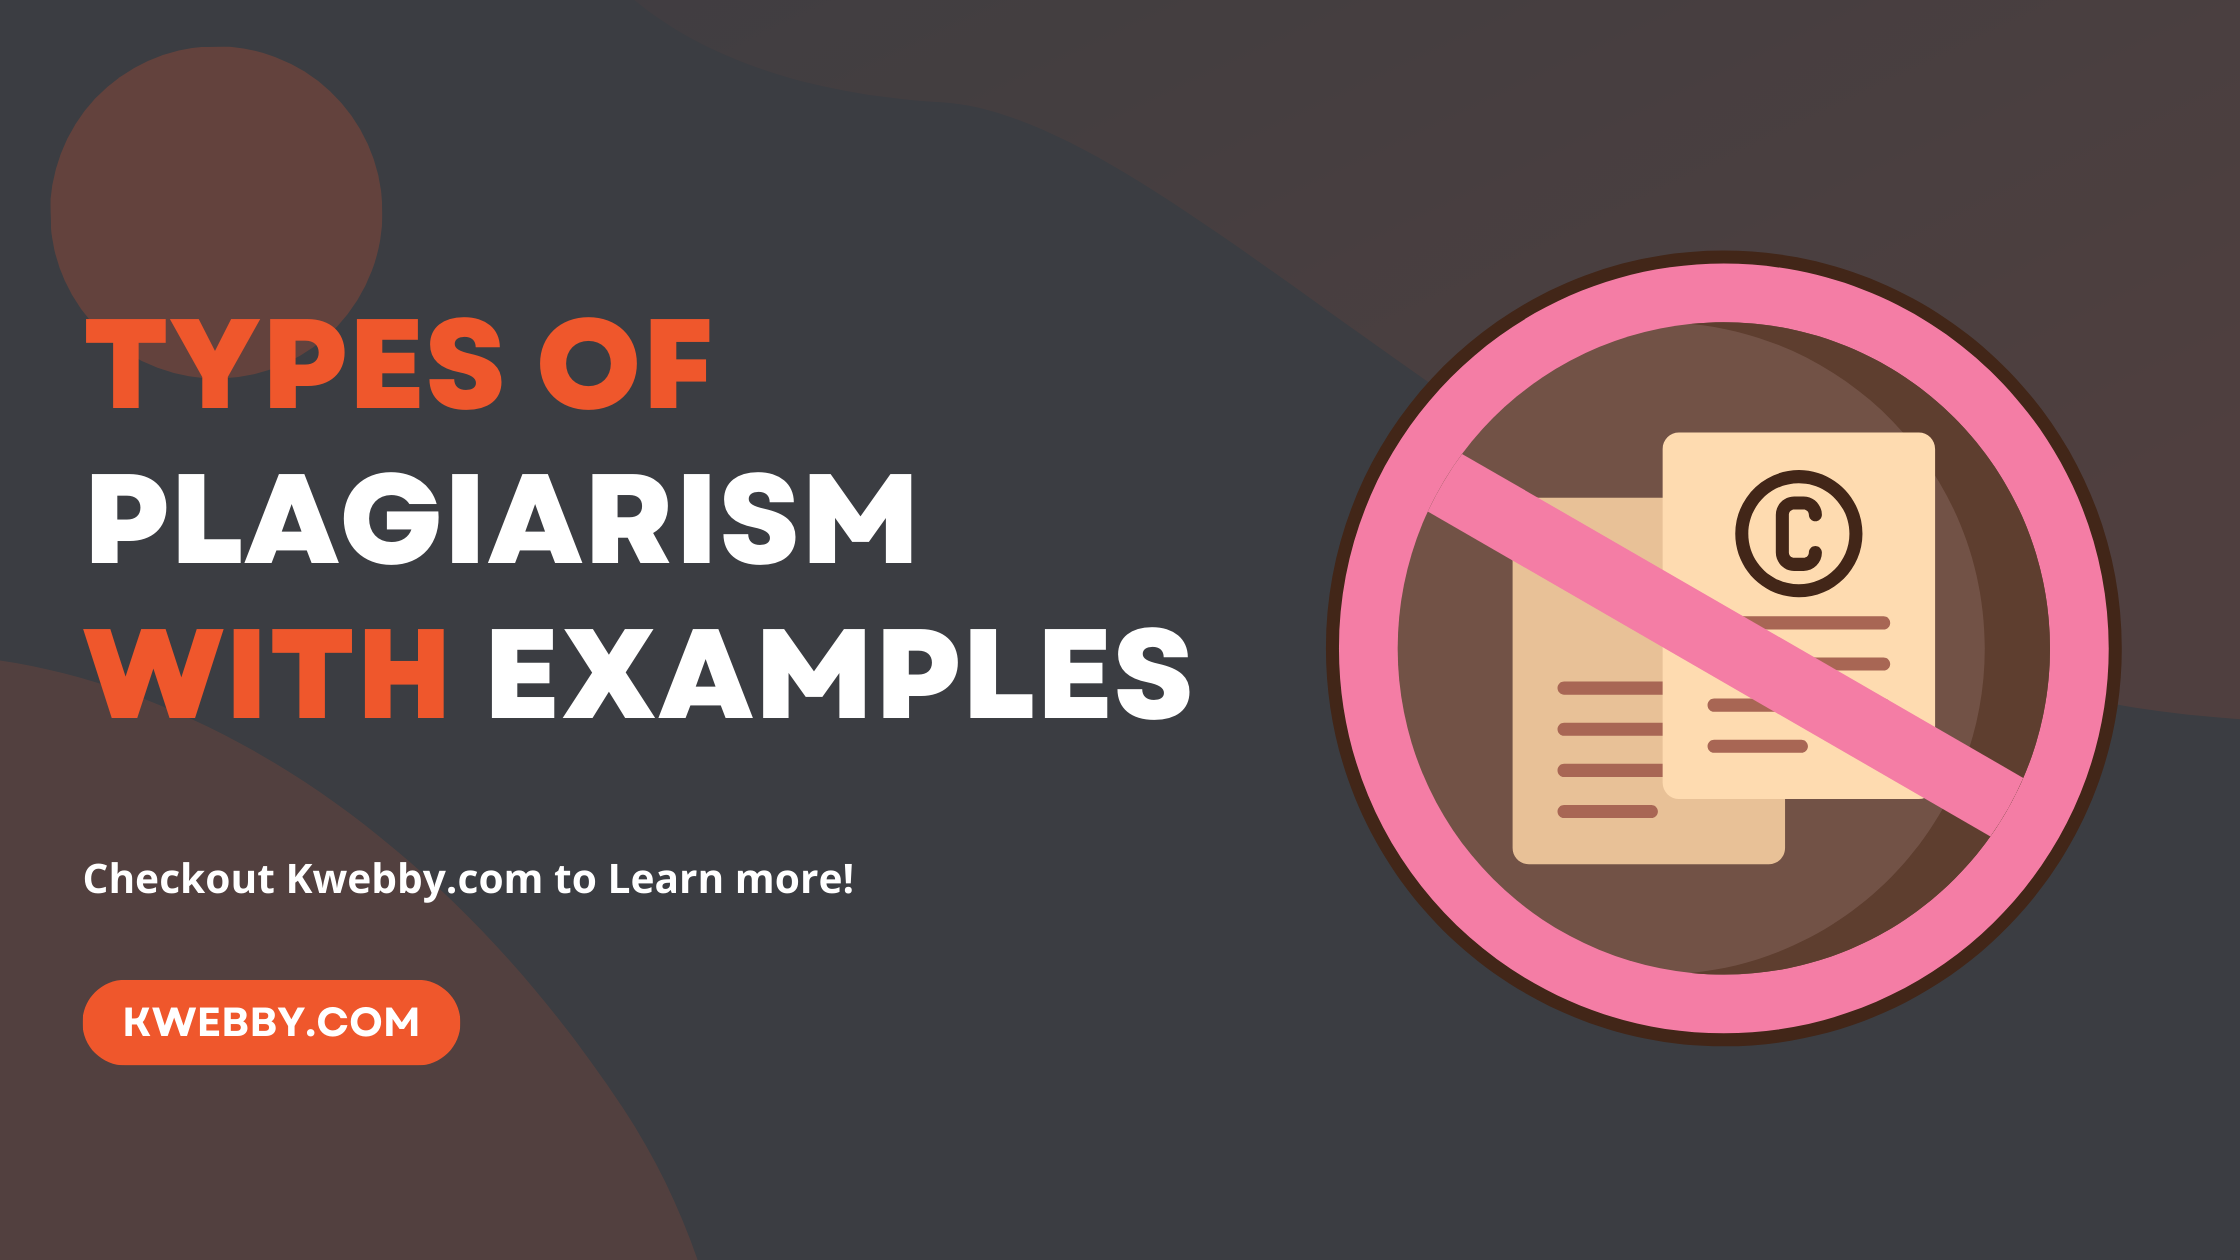 7 Types of Plagiarism (with Examples & Tips to Avoid)